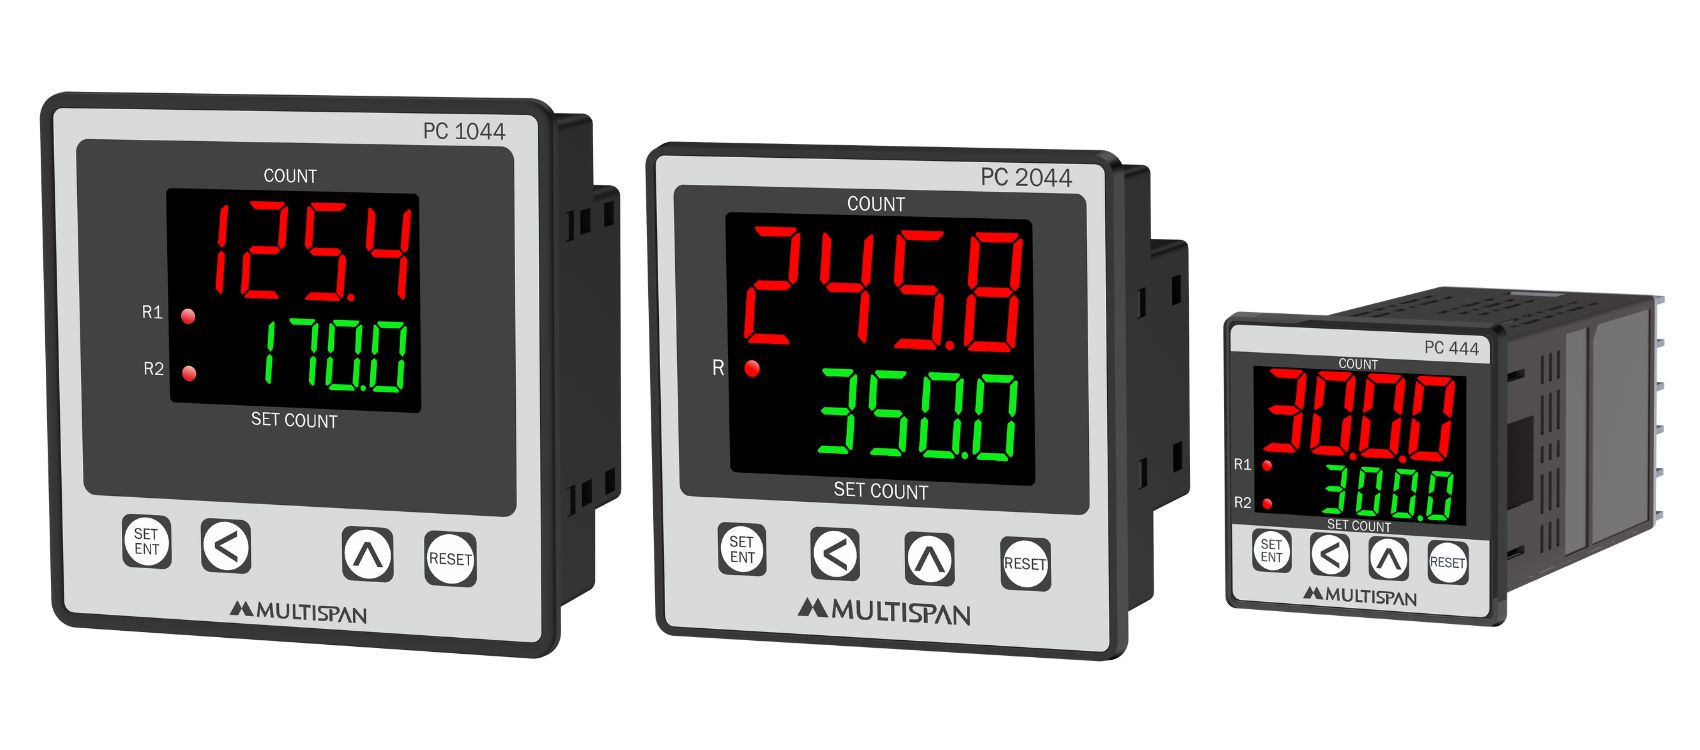 PC-1044 - Programmable counter - product image